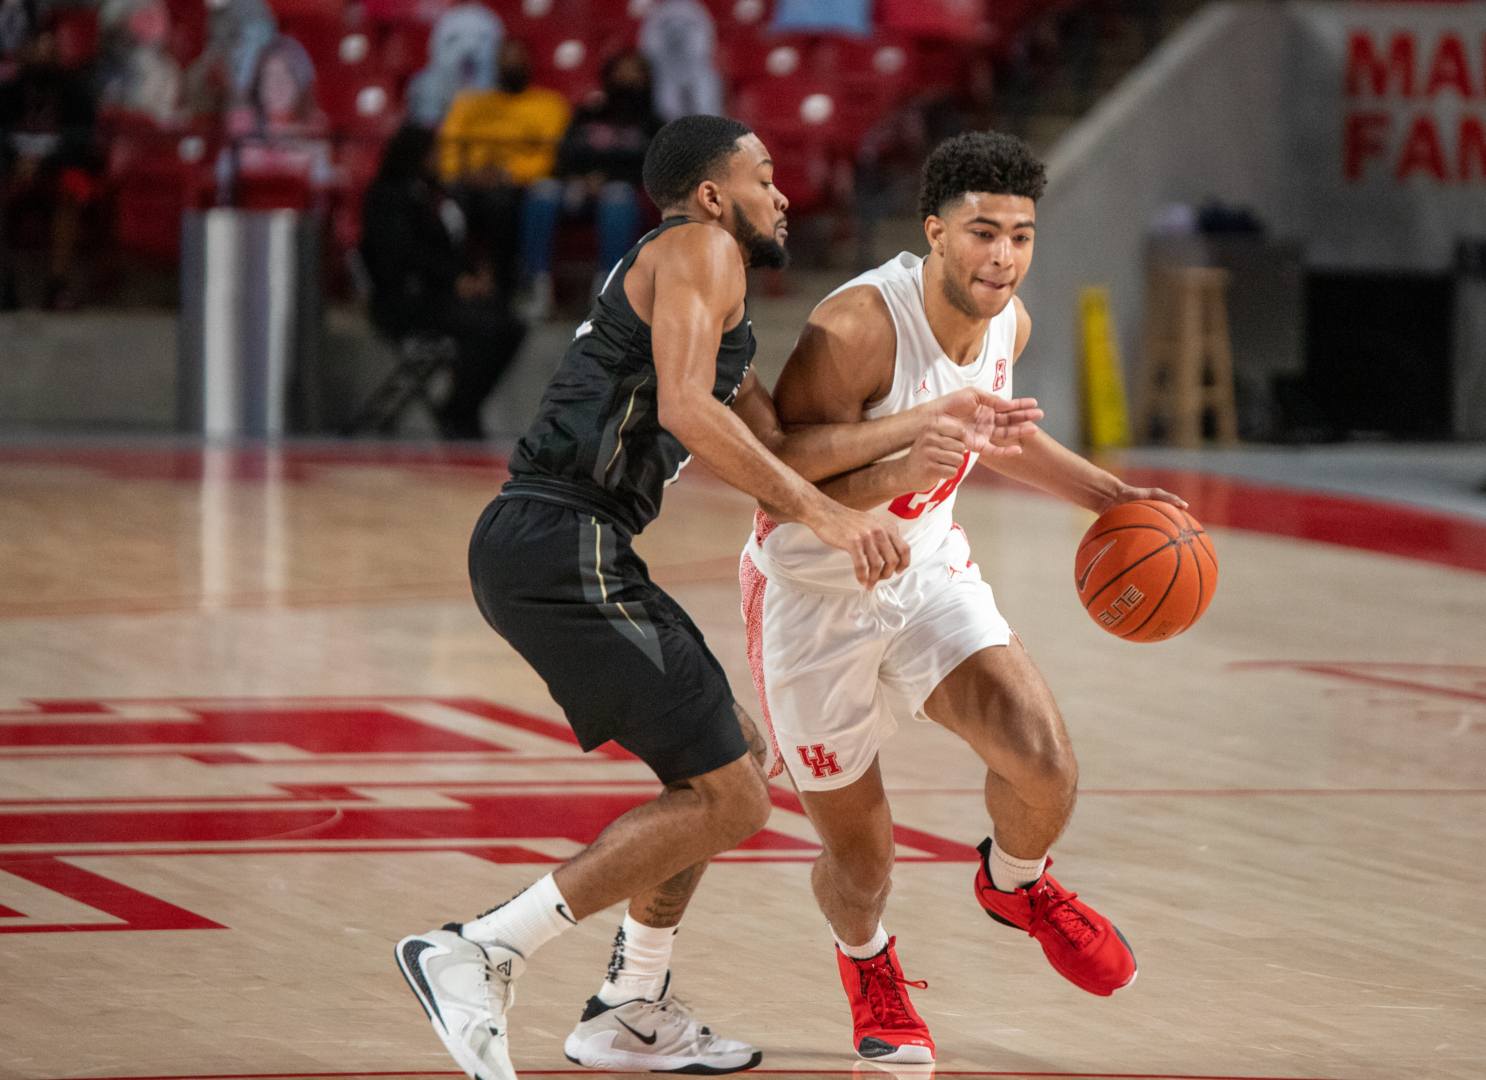 UH junior guard Quentin Grimes scored a season-high 29 points in the Cougars' victory of USF Wednesday night | Andy Yanez/The Cougar